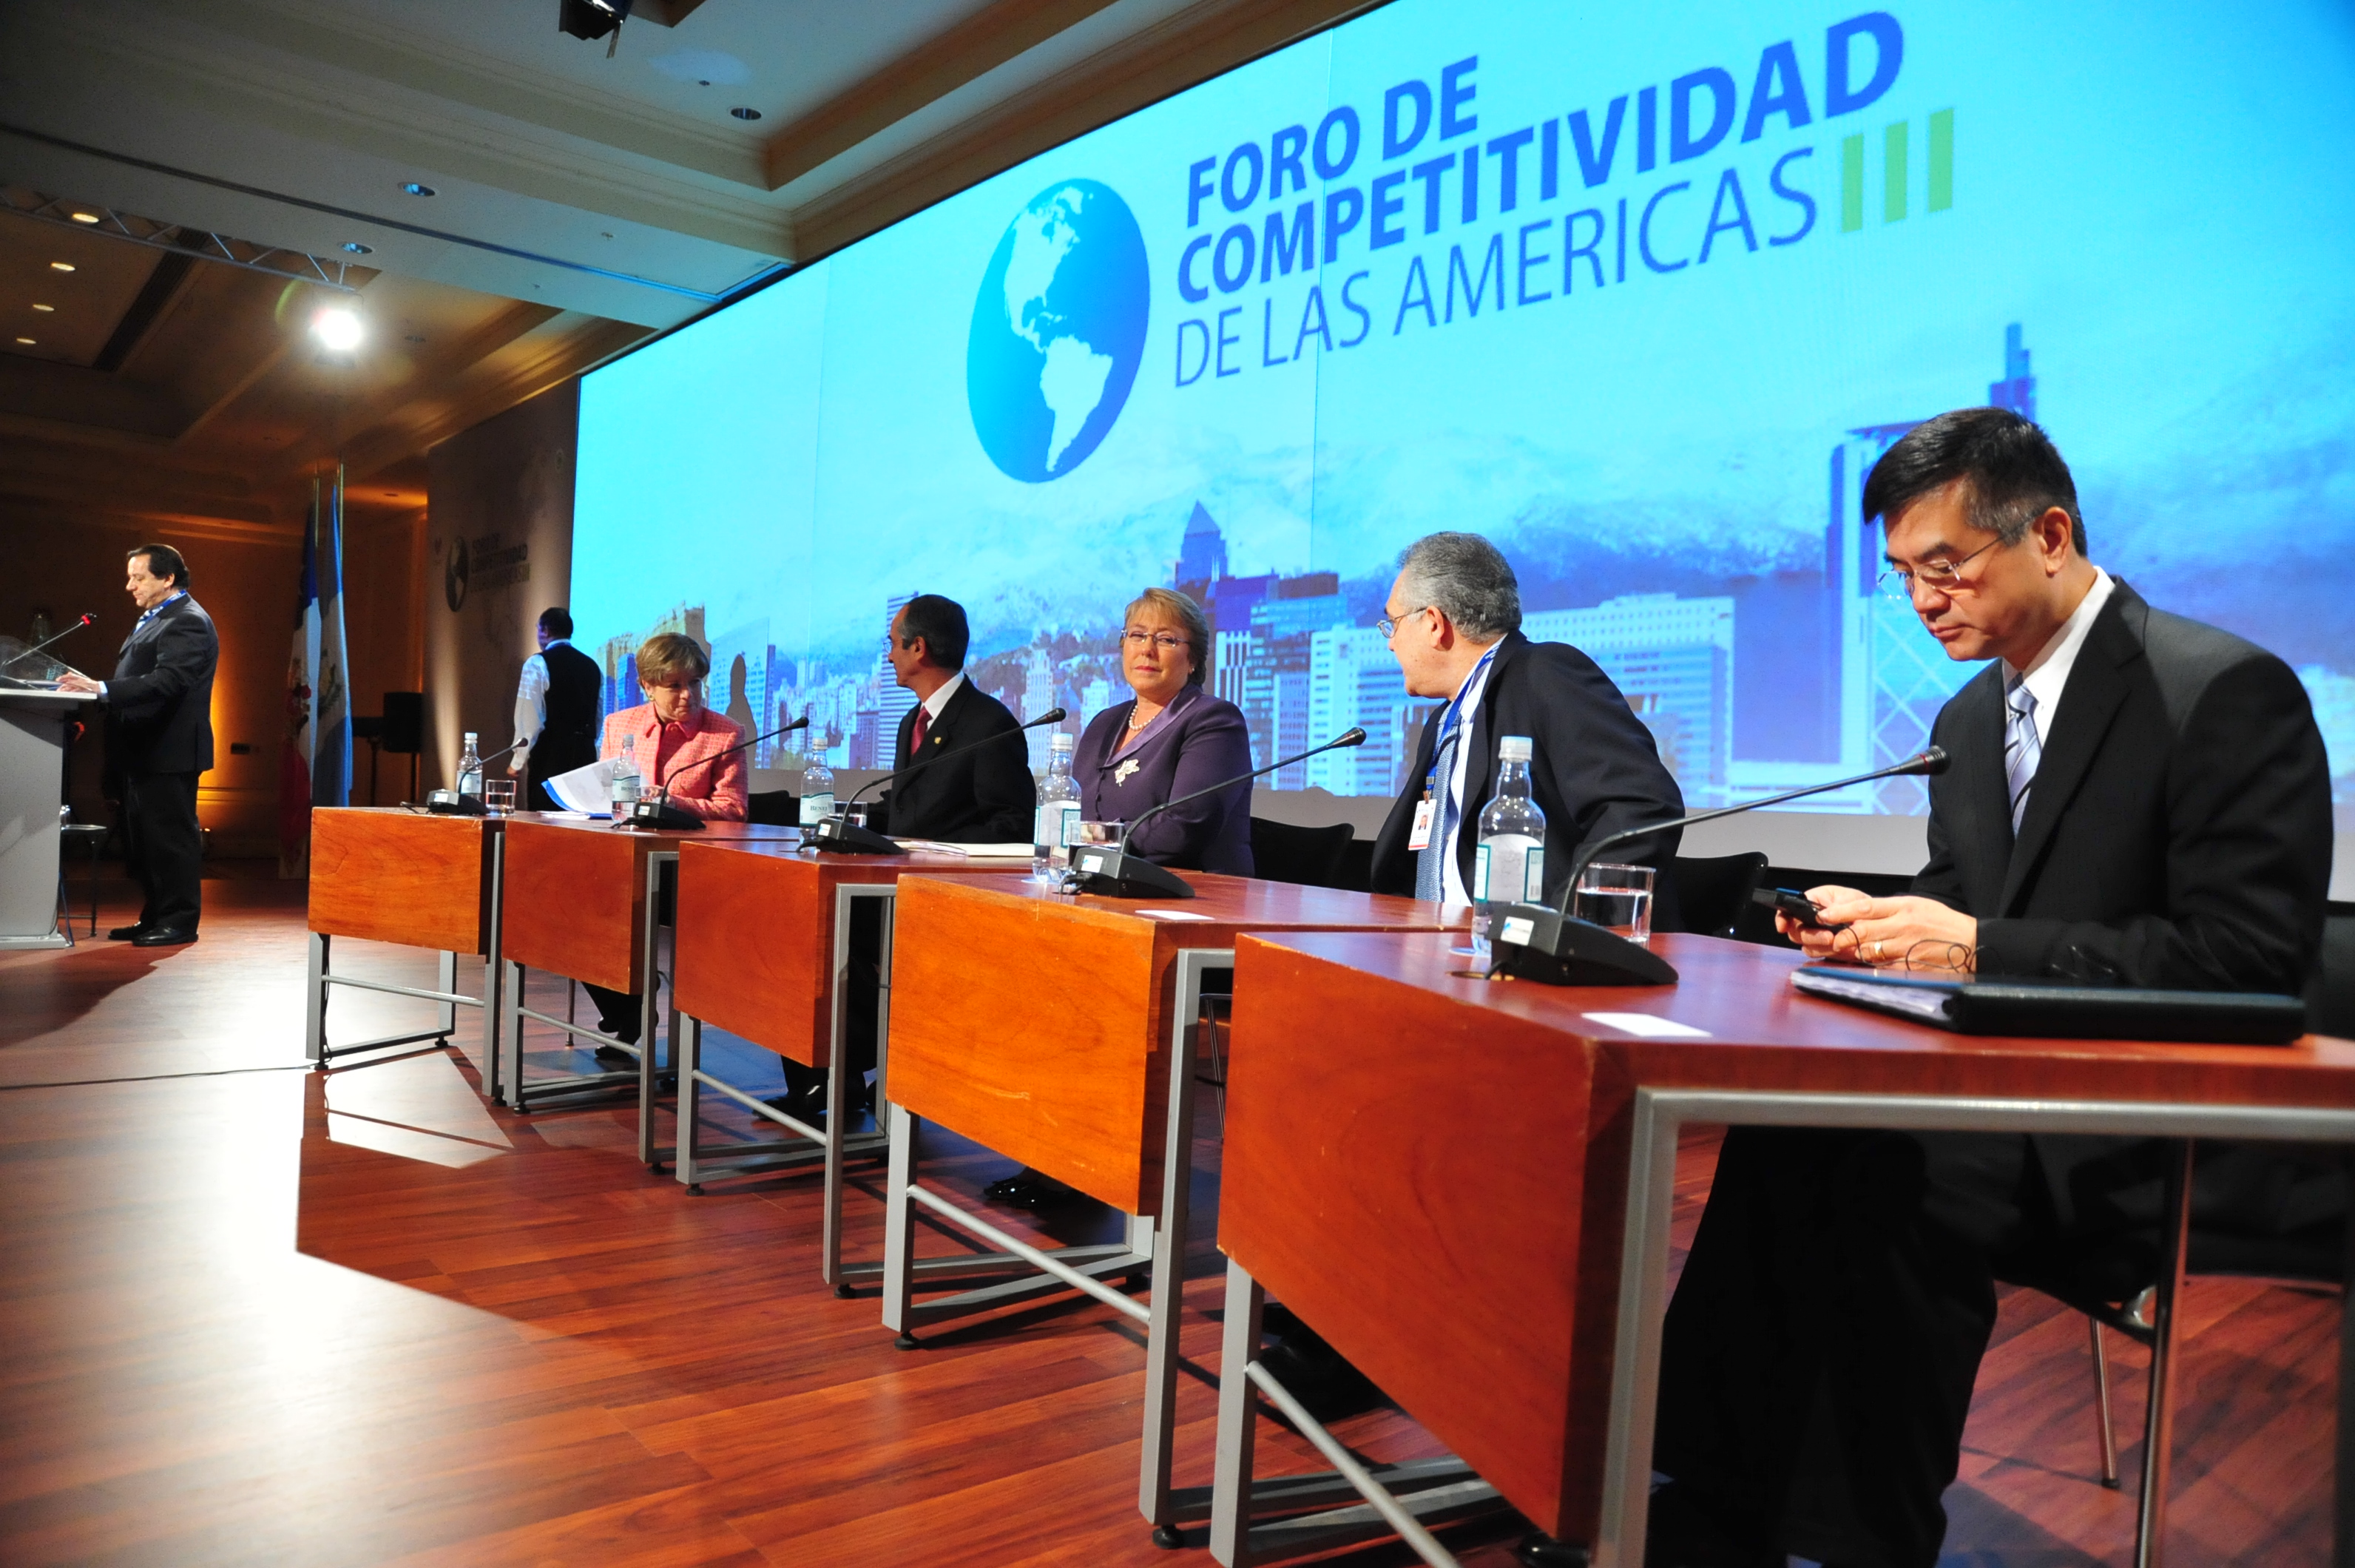 Opening Plenary Session with Alicia Barcena, Executive Secretary of the Economy Commission for Latin America and the Caribbean (ELLAC); Alvaro Colom, President of Guatemala; Michelle Bachelet, President of Chile; Hugo Lavados, Chilean Minister of Economy; and Gary Locke, U.S. Secretary of Commerce.